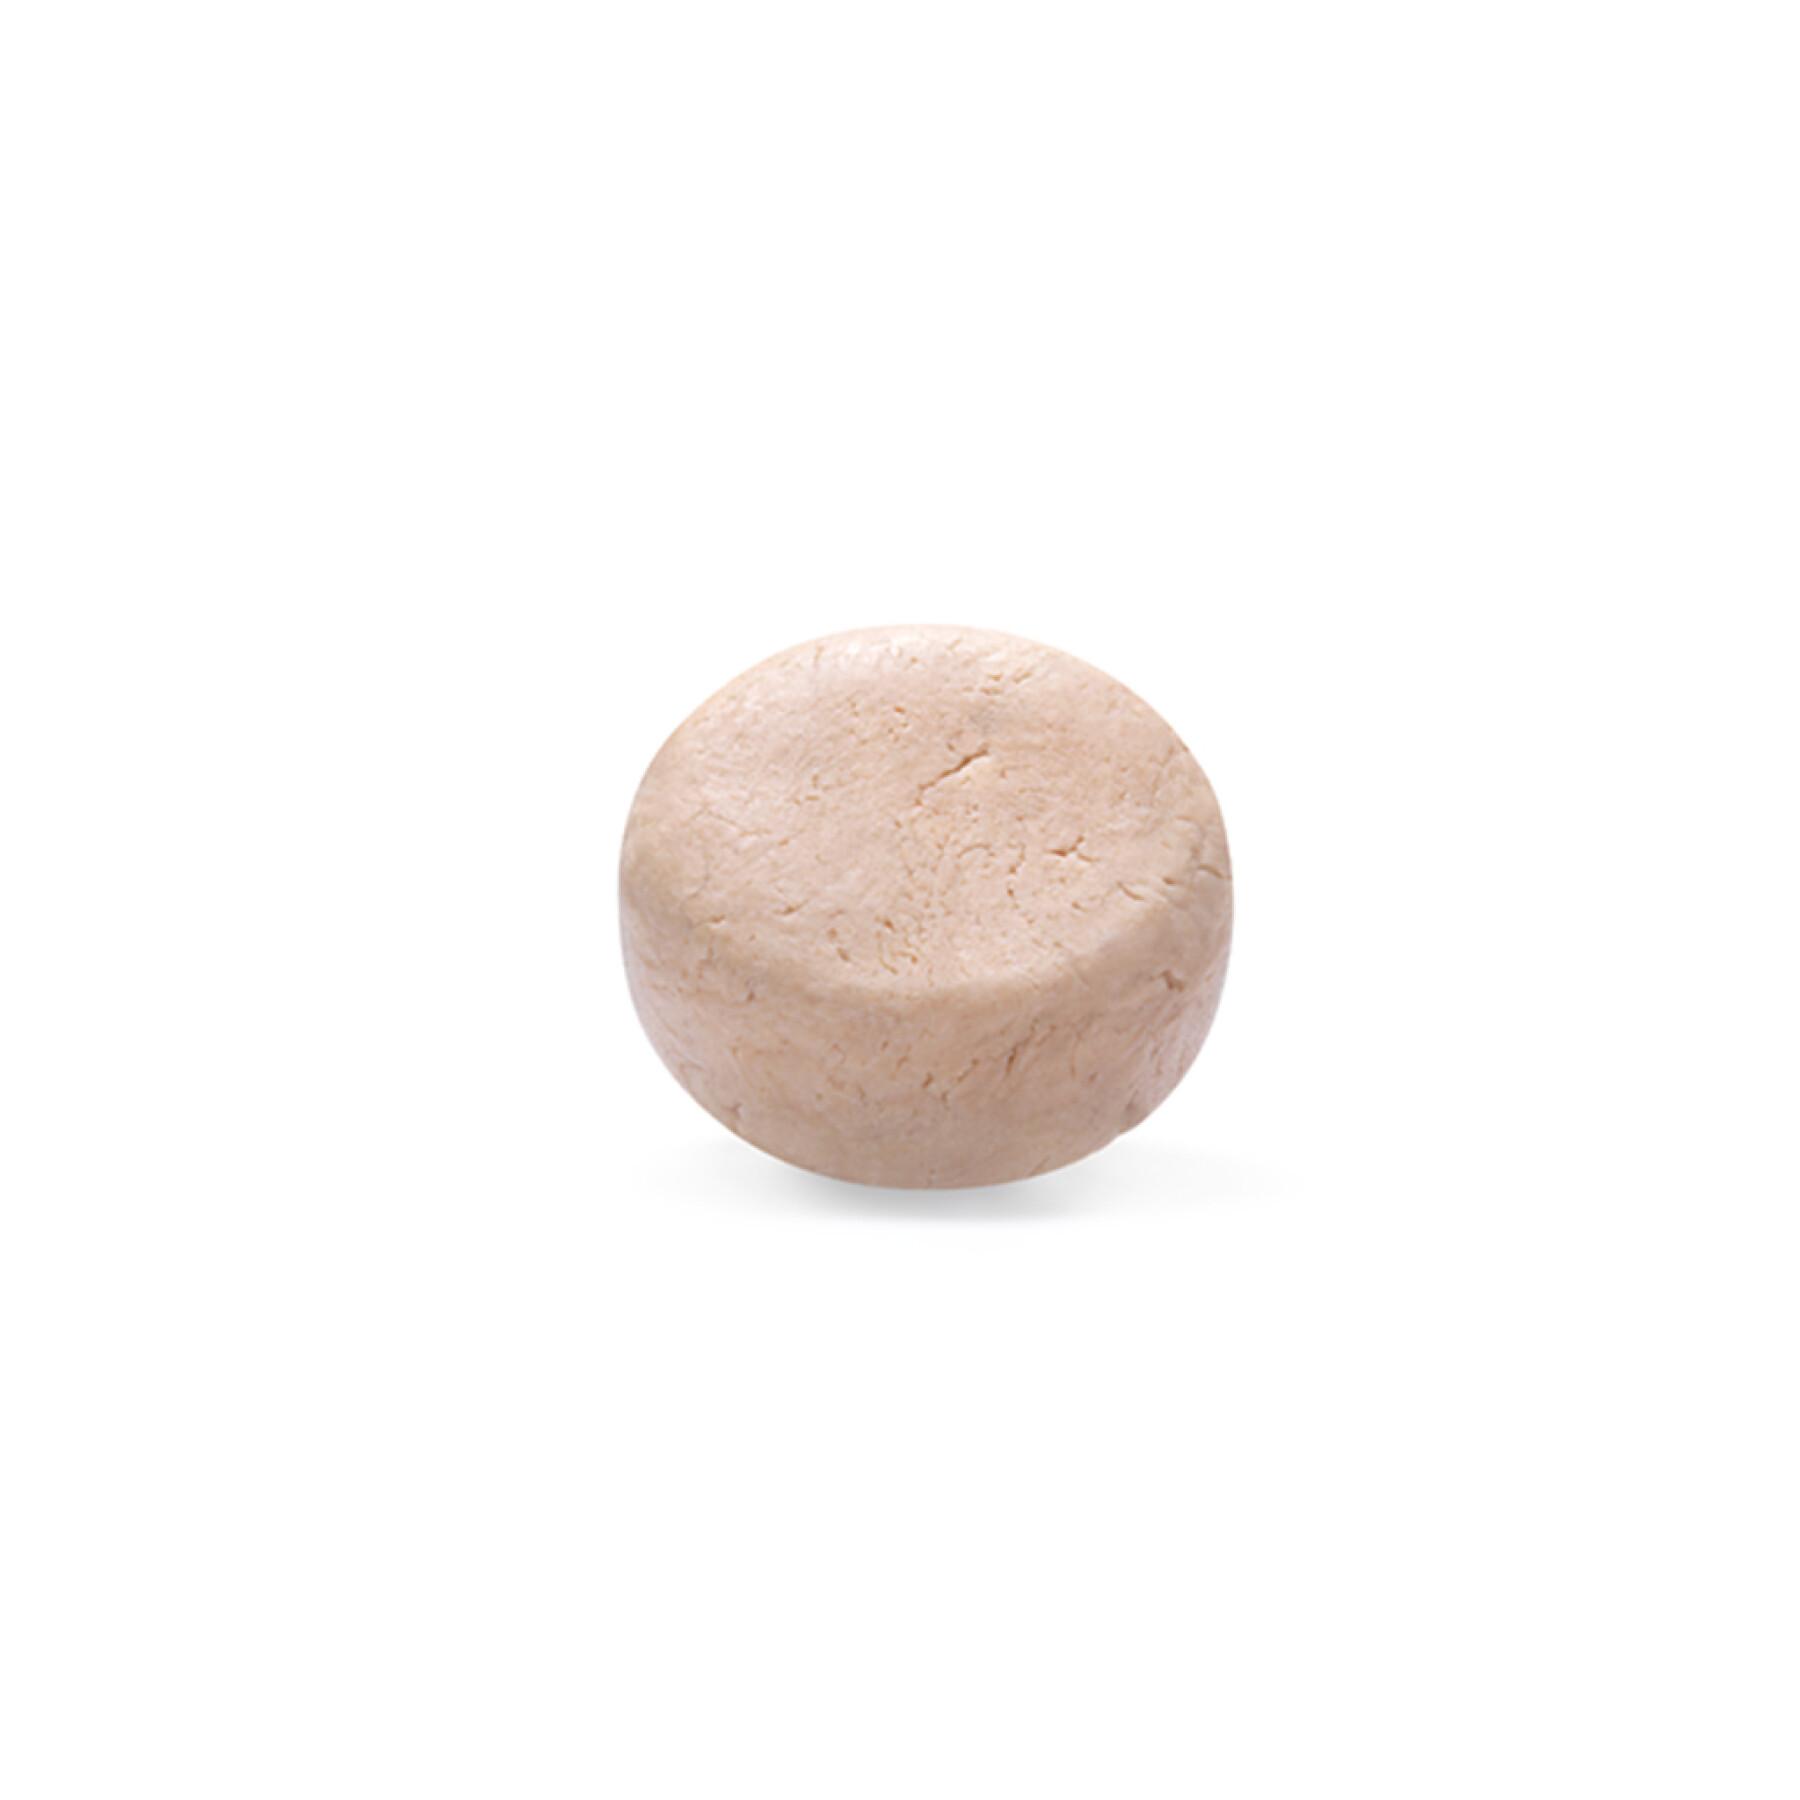 Solid shampoo travel size refill by 2 Pachamamaï Glamourous